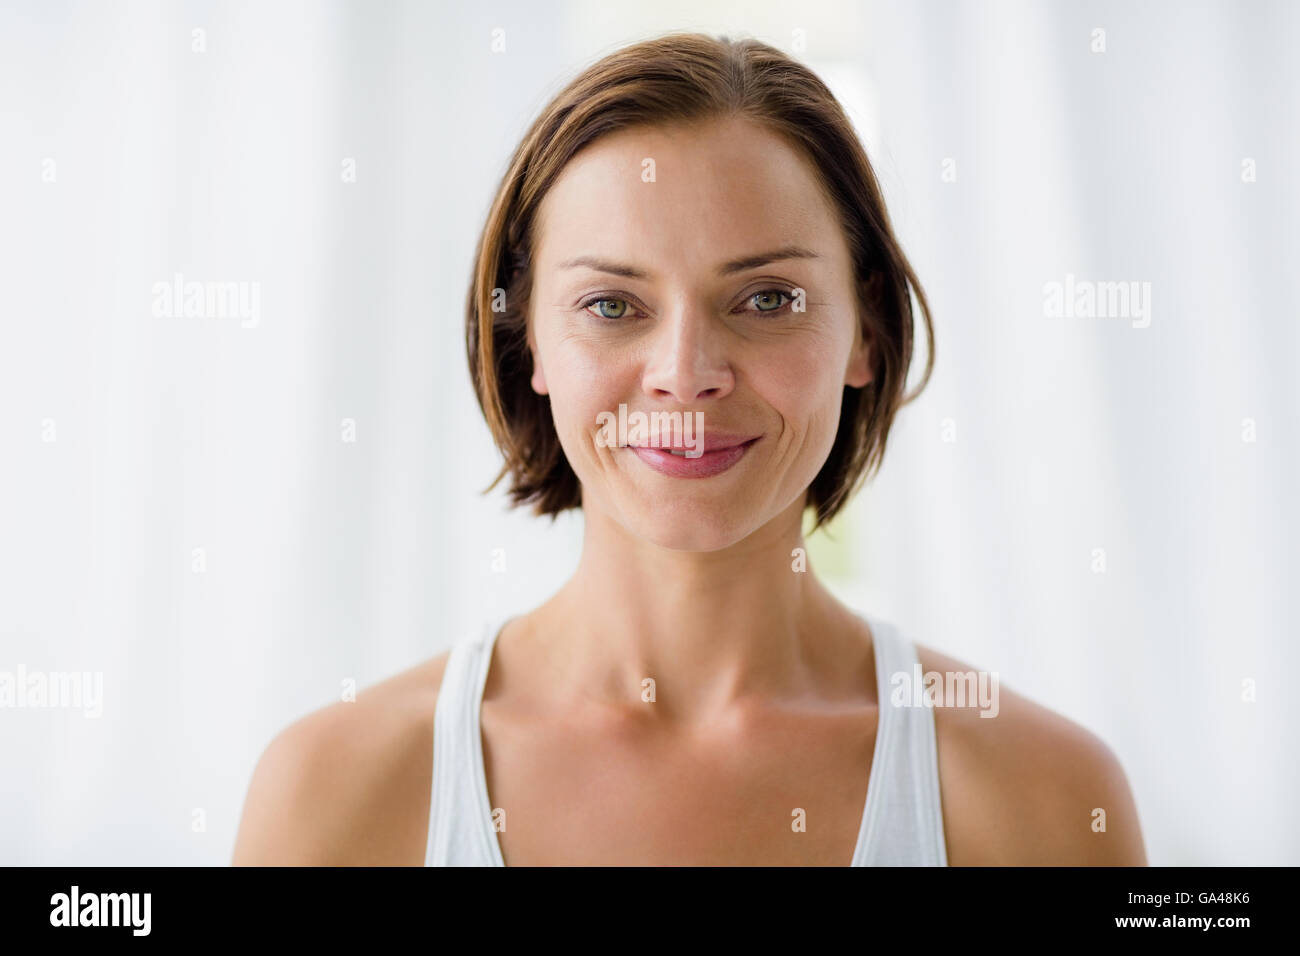 Portrait of smiling woman in fitness studio Banque D'Images